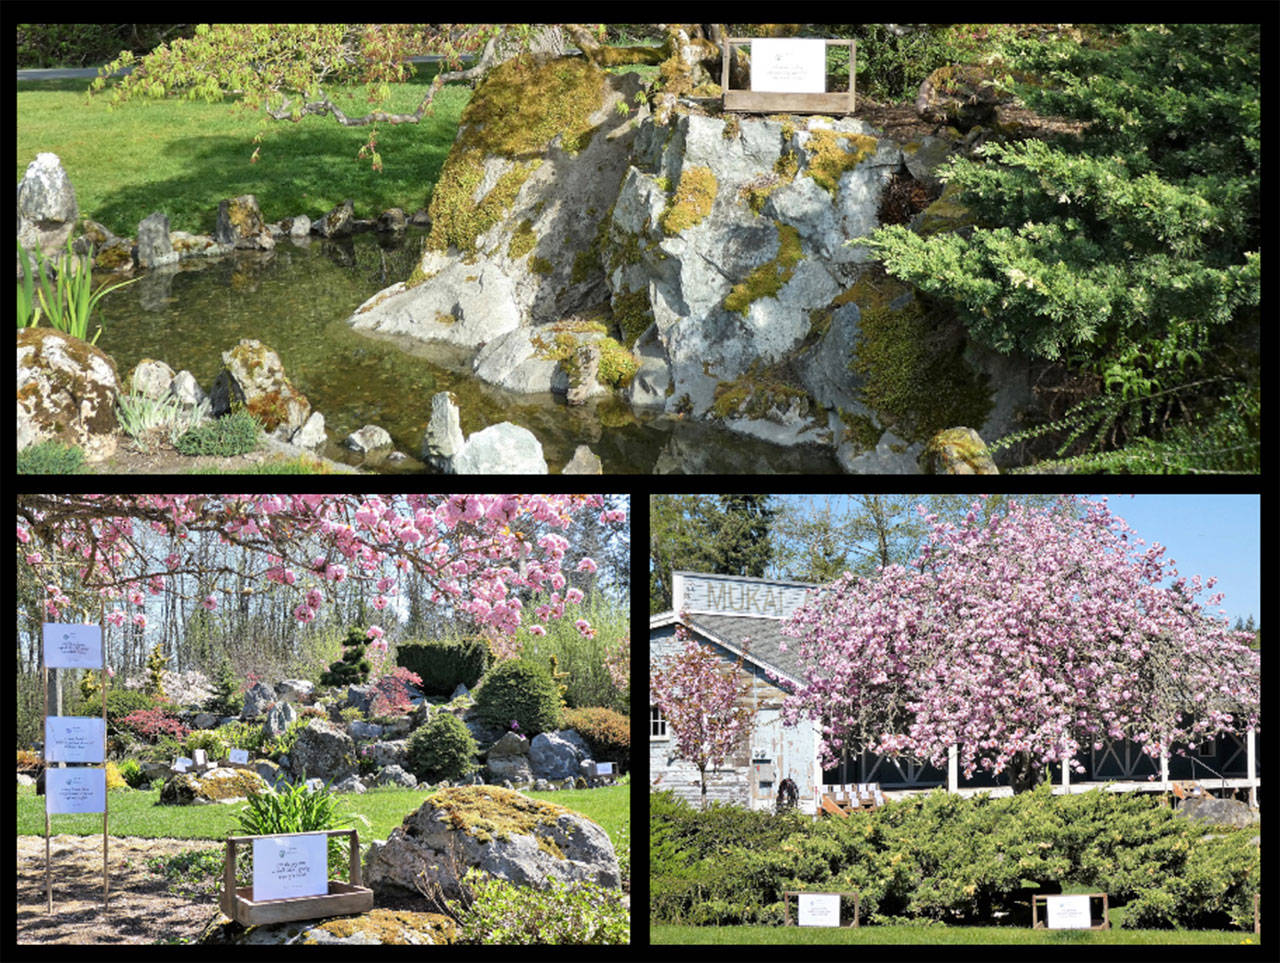 Mukai Farm & Garden’s beautifully landscaped grounds are now bursting with blooms and greenery, as well as a display of one of the most simple and beautiful of all poetry forms — Haiku (Jim Diers Photos).